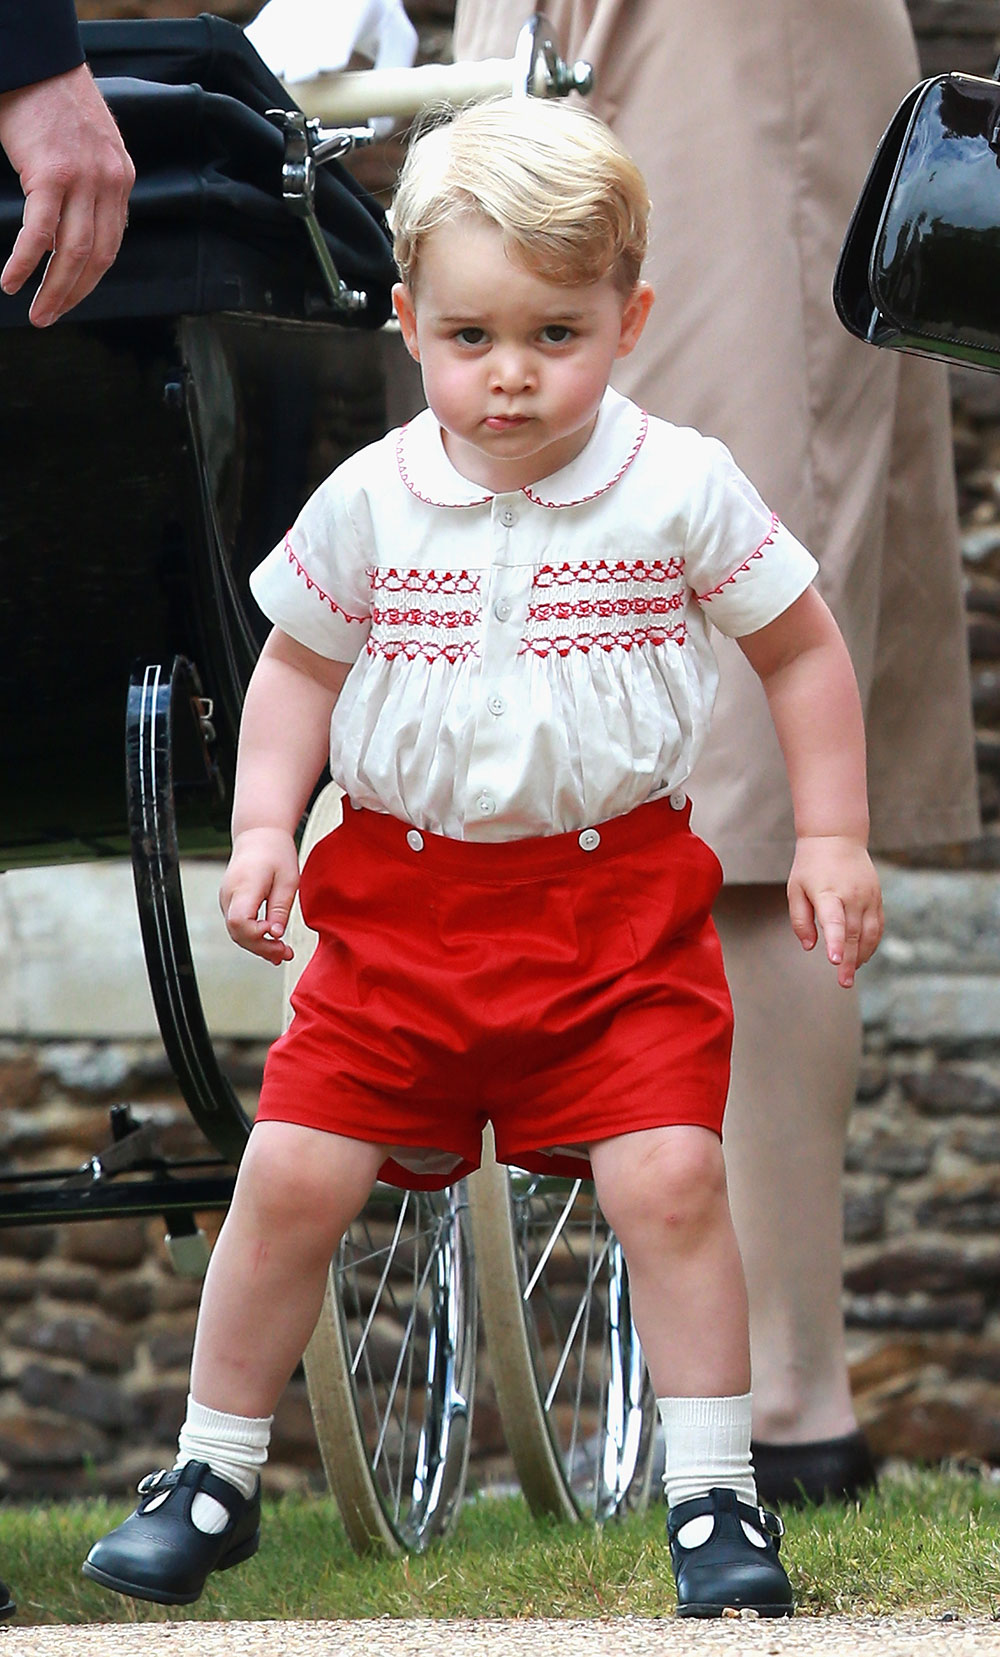 Prince George payed an homage to his father wearing a Rachel Riley white smocked top and bright red shorts, similar to the outfit worn by Prince William when he met his younger brother for the first time in September 1984.